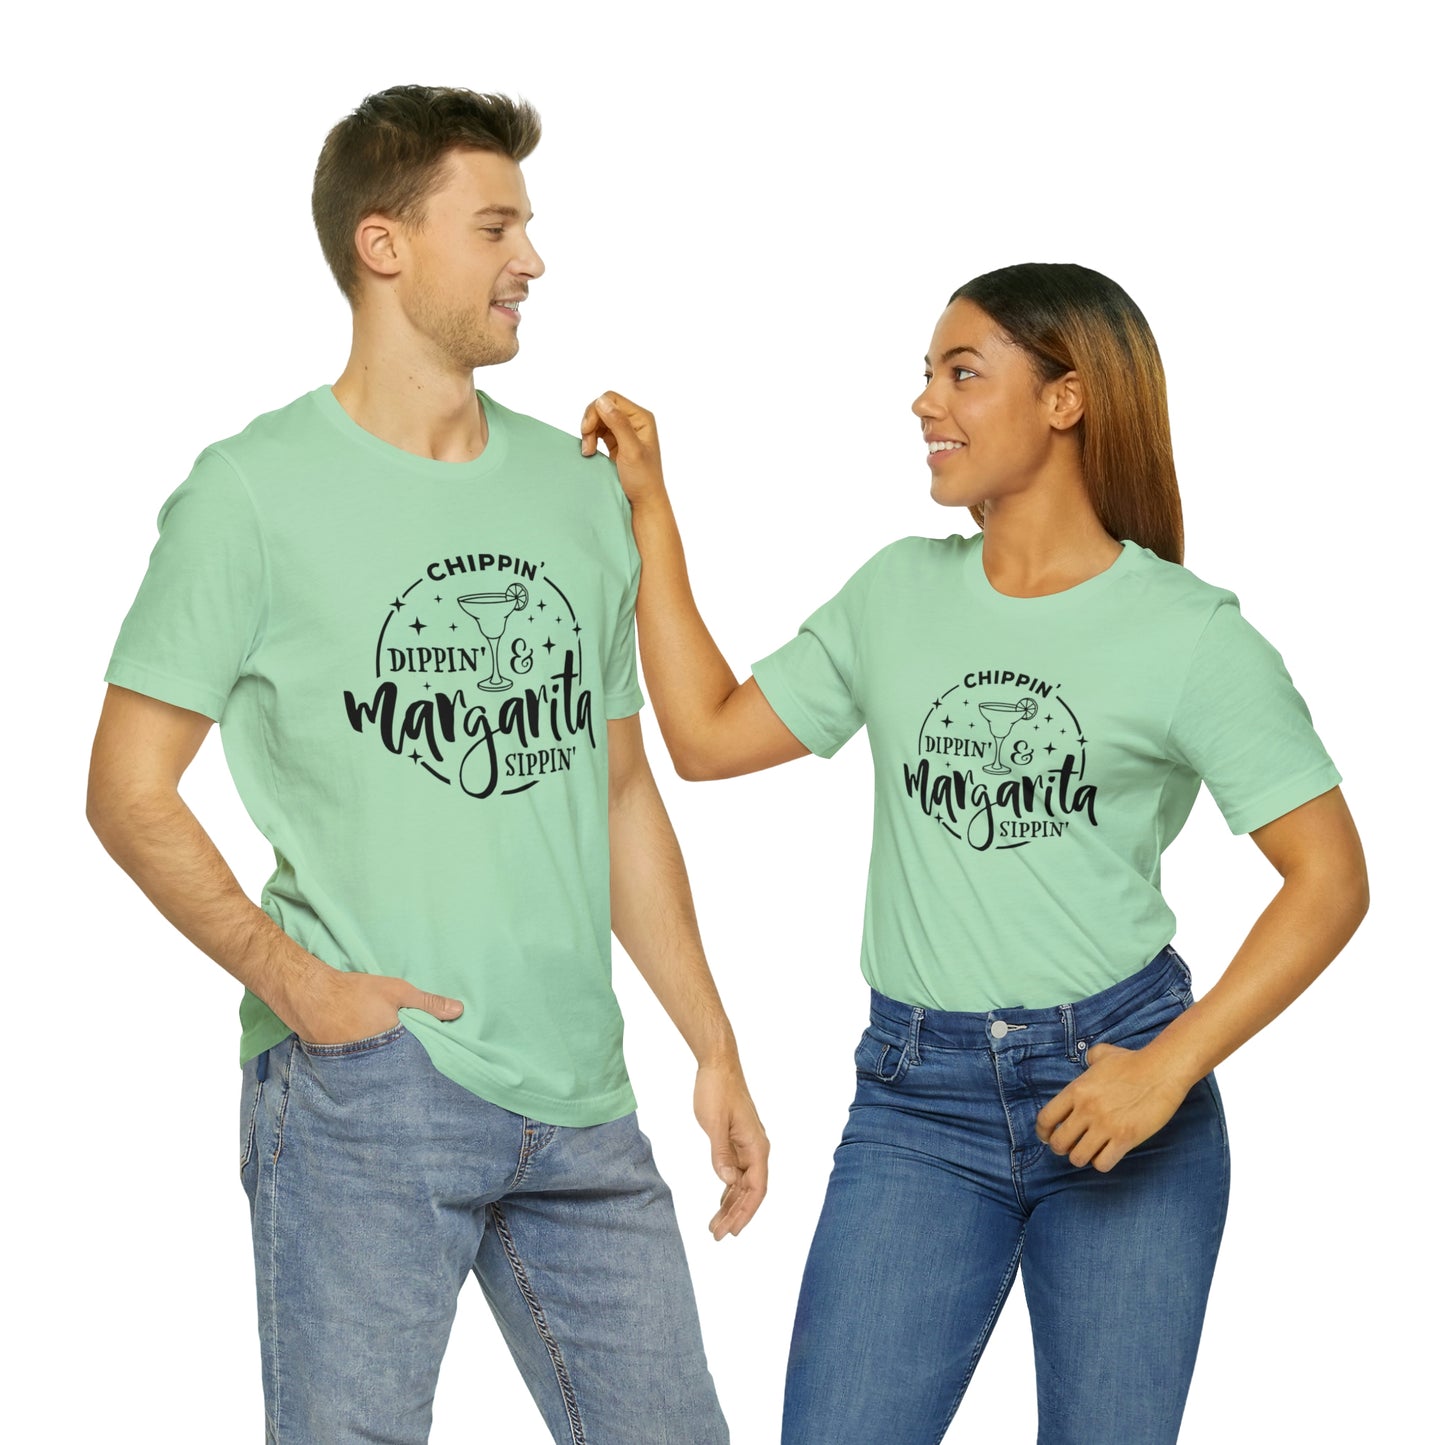 "Chippin, Dippin, and Margarita Sippin" Bella Canvas Short Sleeve Tee